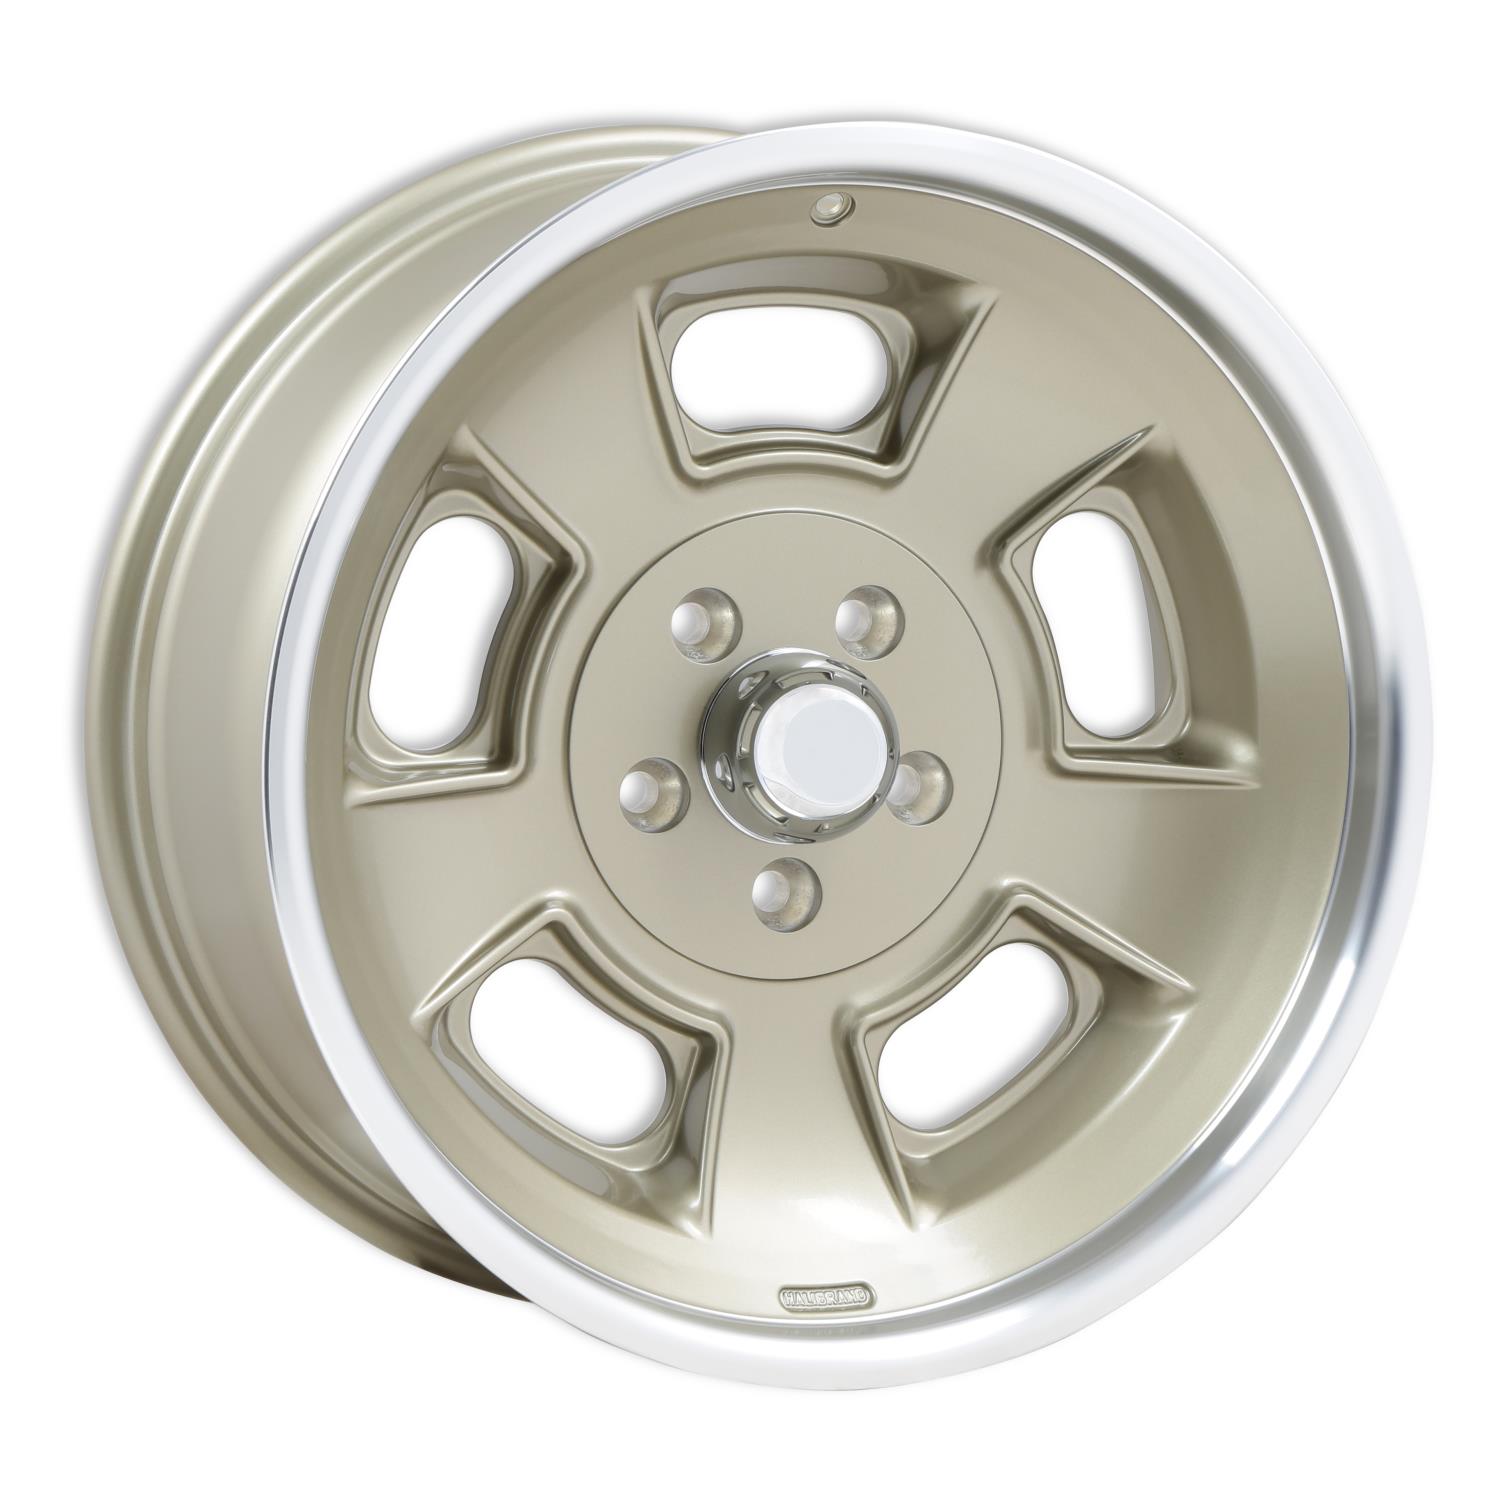 Sprint Front Wheel, Size: 19x8.5", Bolt Pattern: 5x5", Backspace: 4.75" [MAG7 with Machined Lip - Semi Gloss Clearcoat